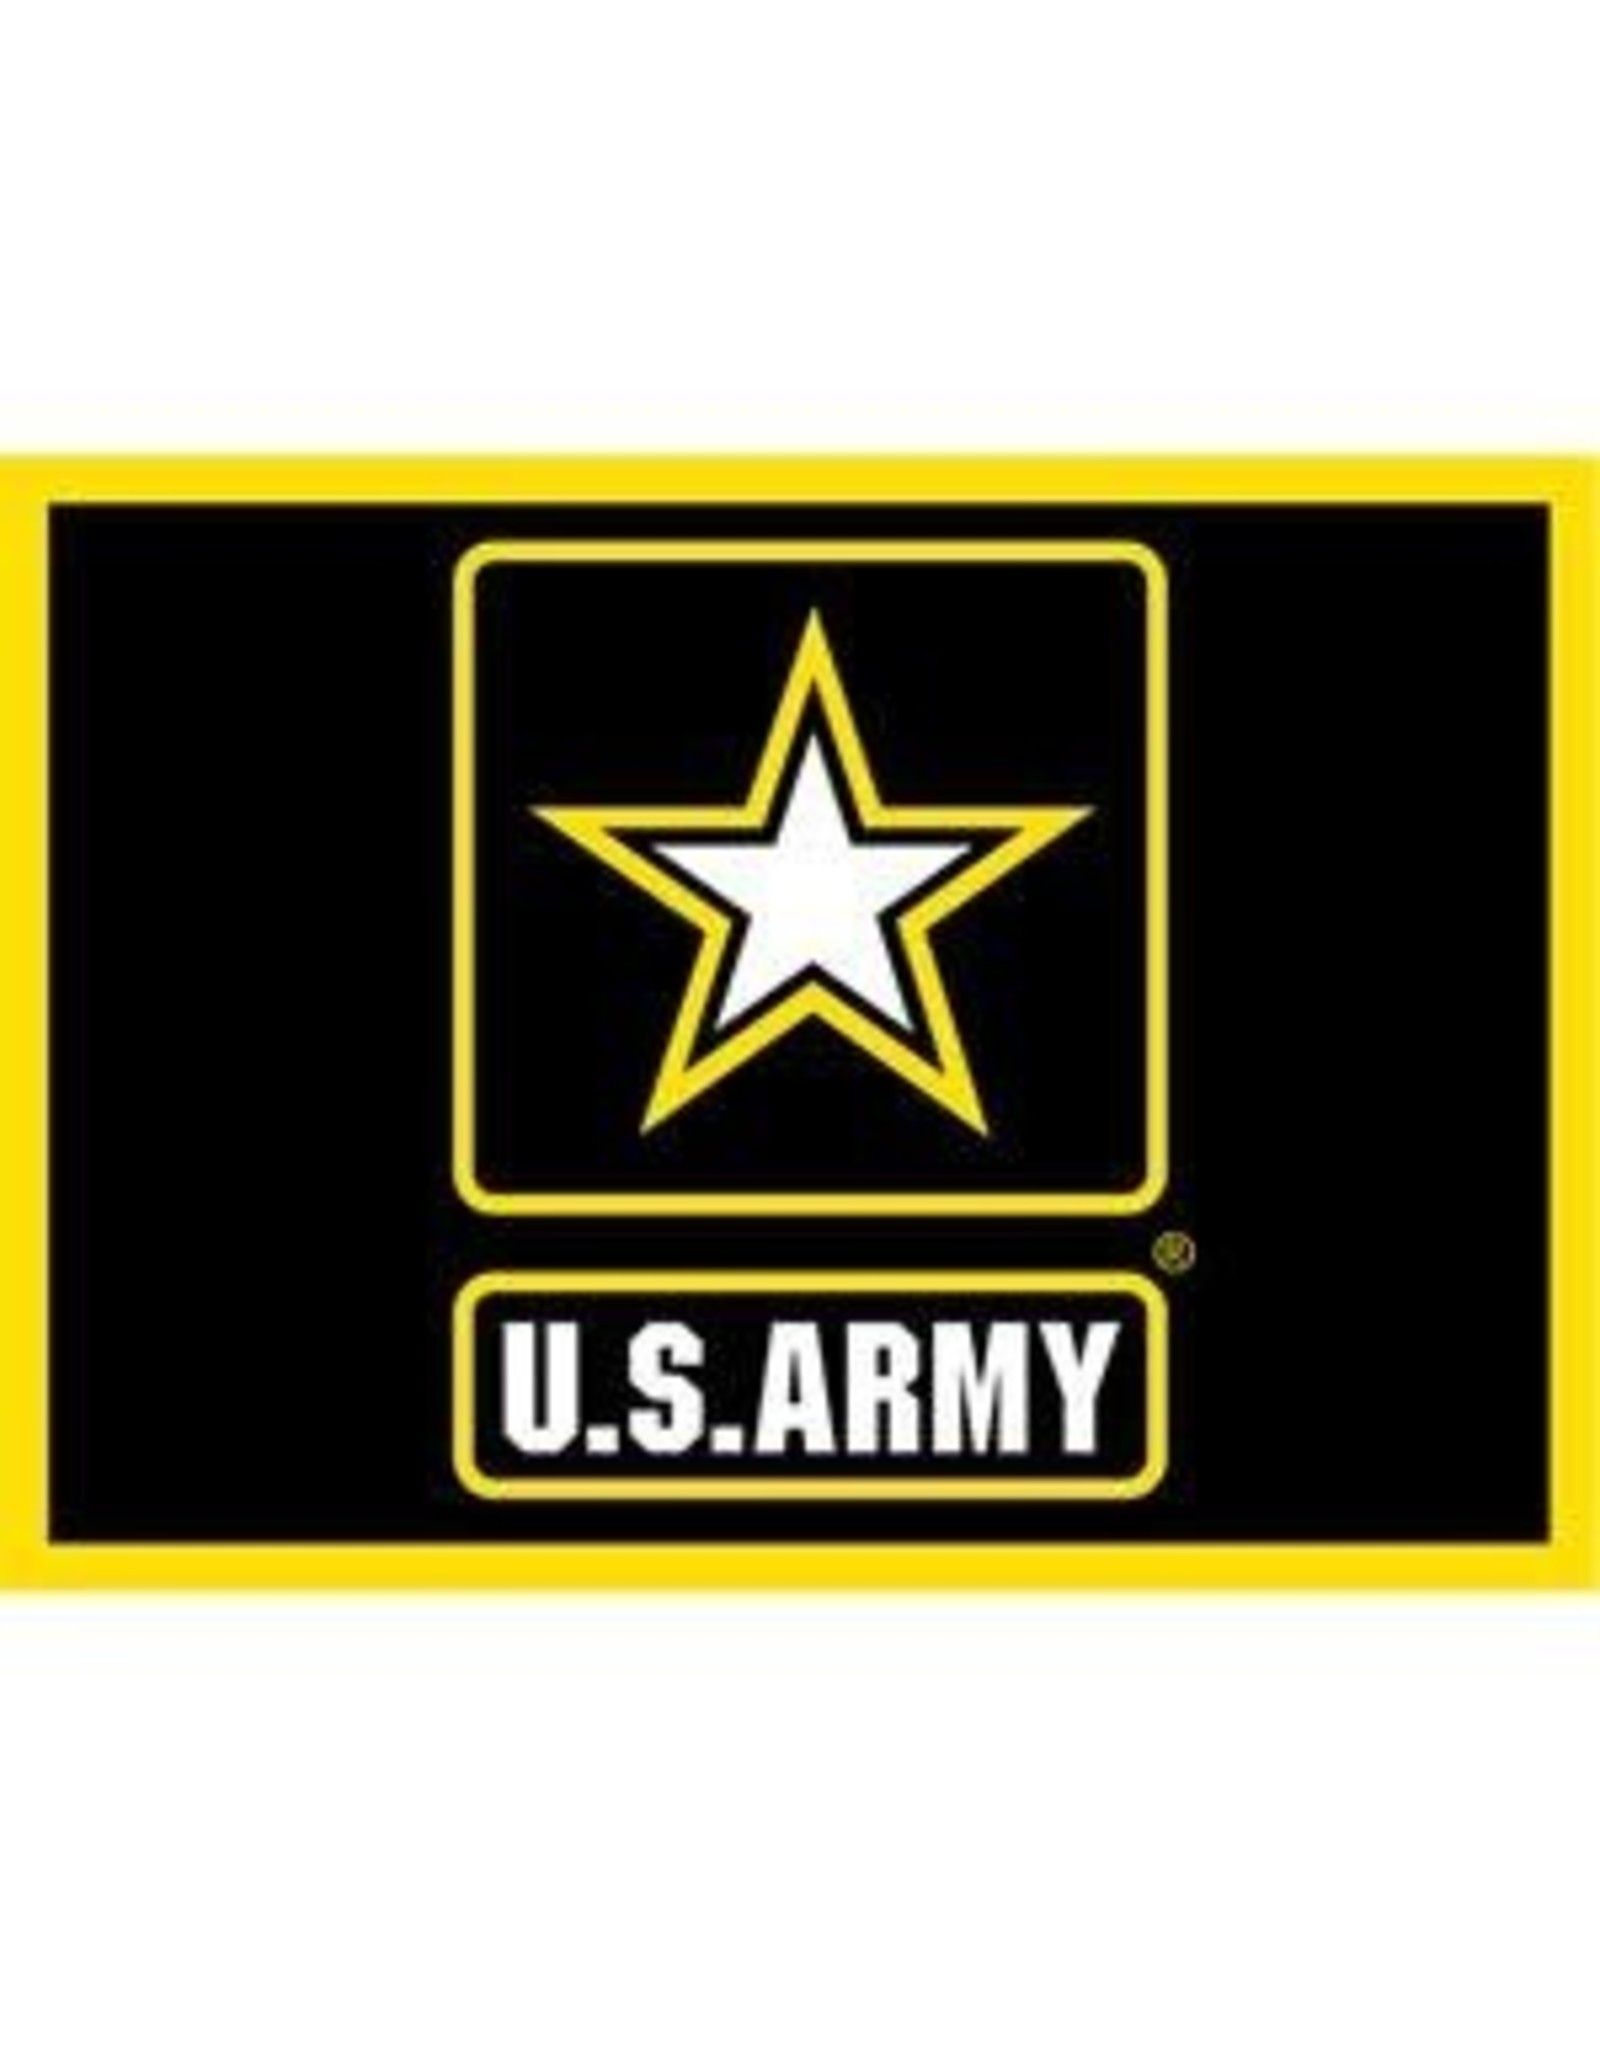 Patch - Army Flag US